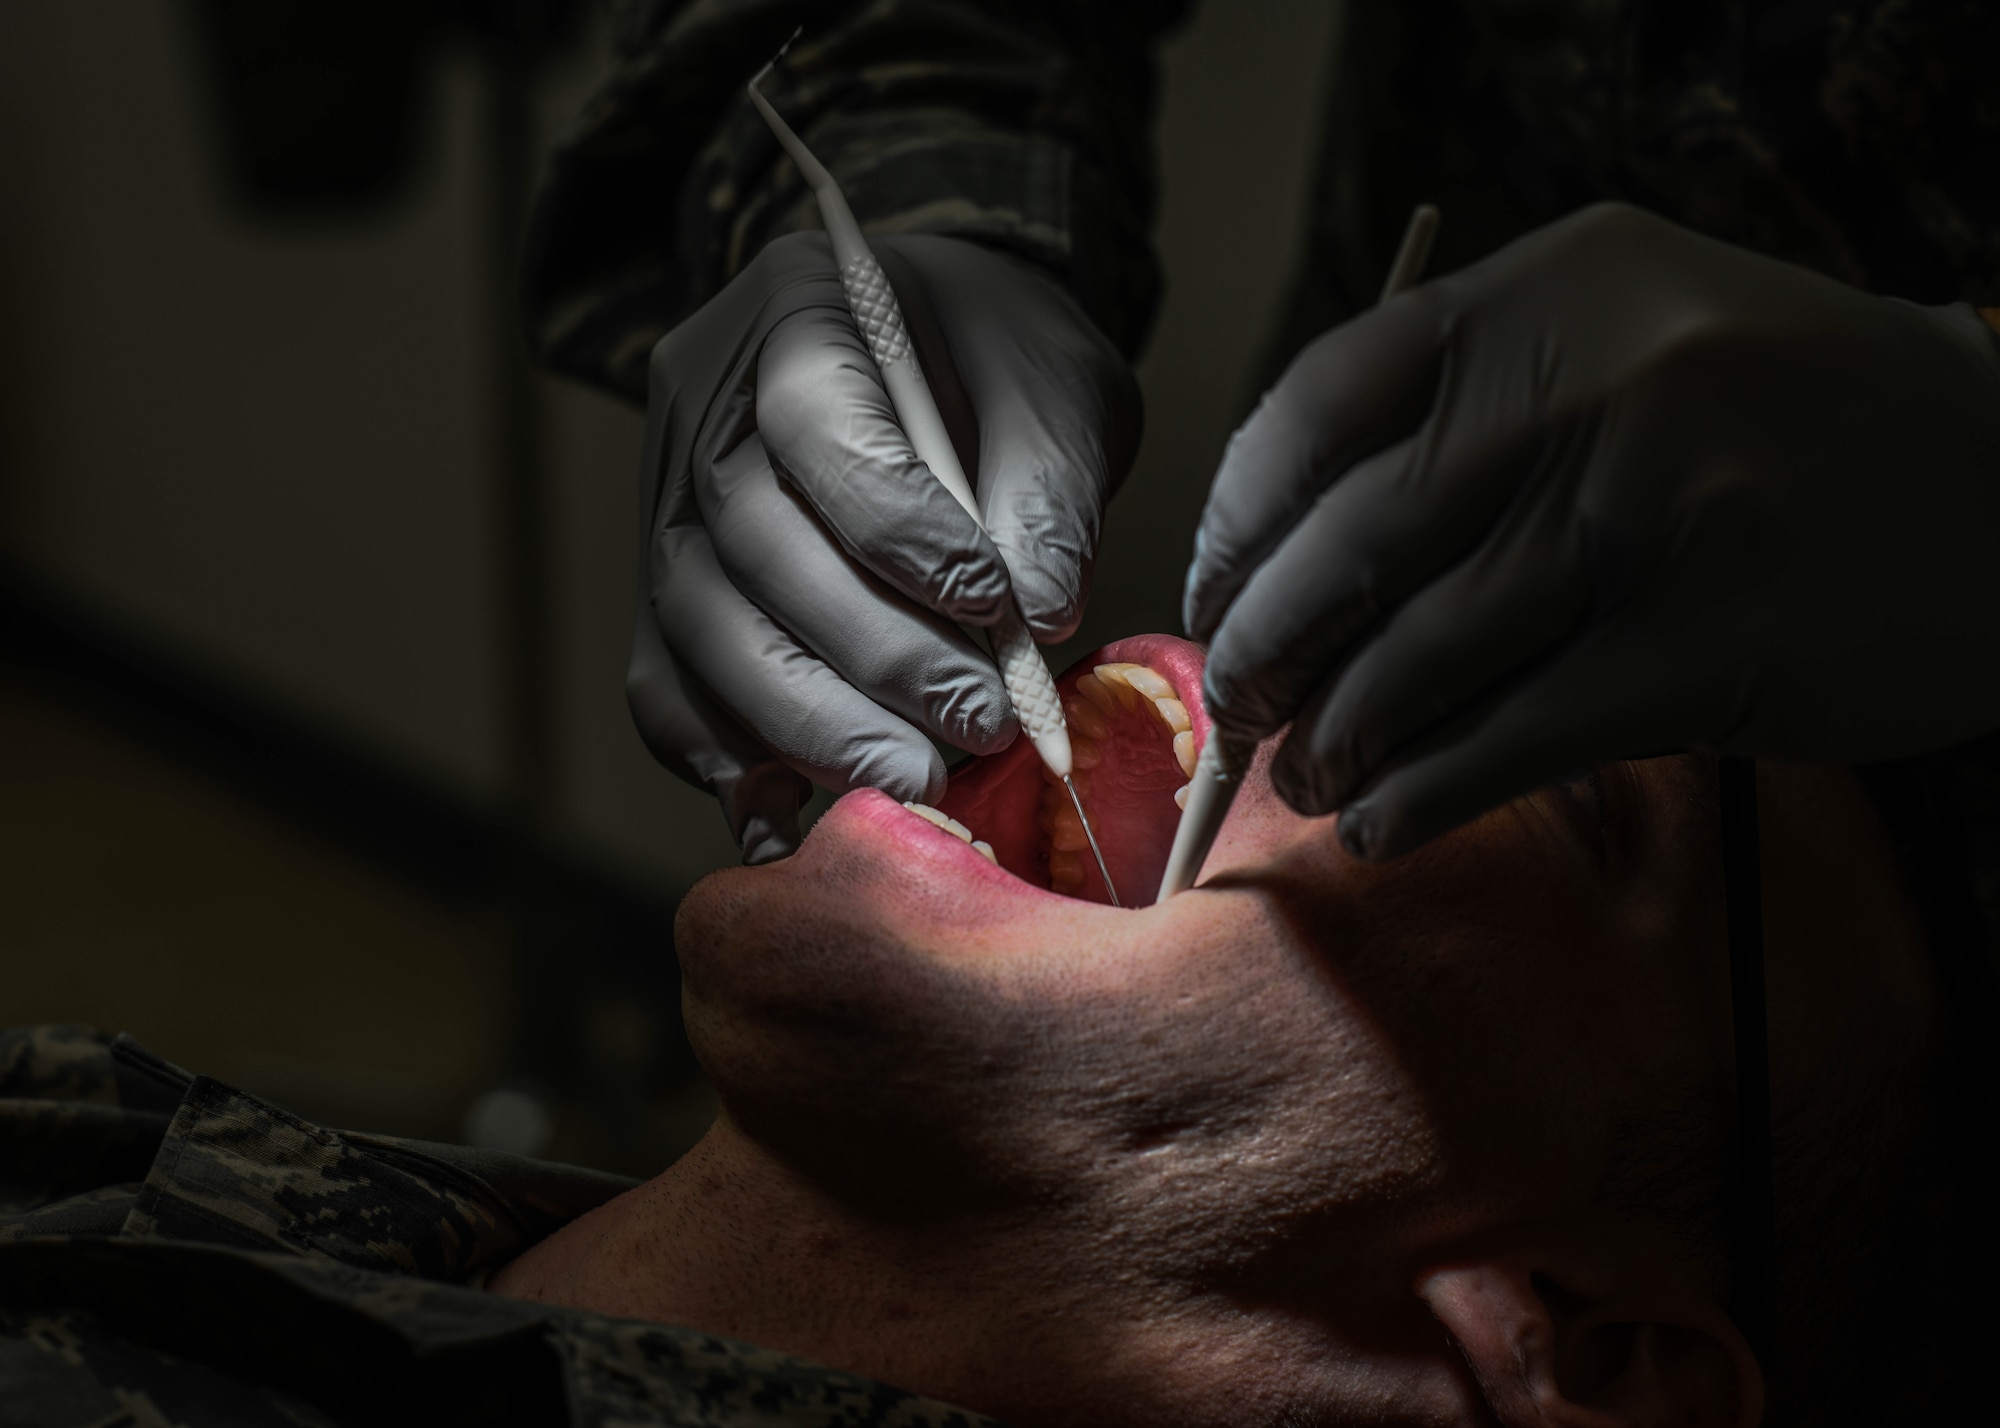 The 910th Medical Squadron helps ensure Youngstown Air Reserve Station's airmen are combat-ready by providing basic medical services, evaluations and immunizations.